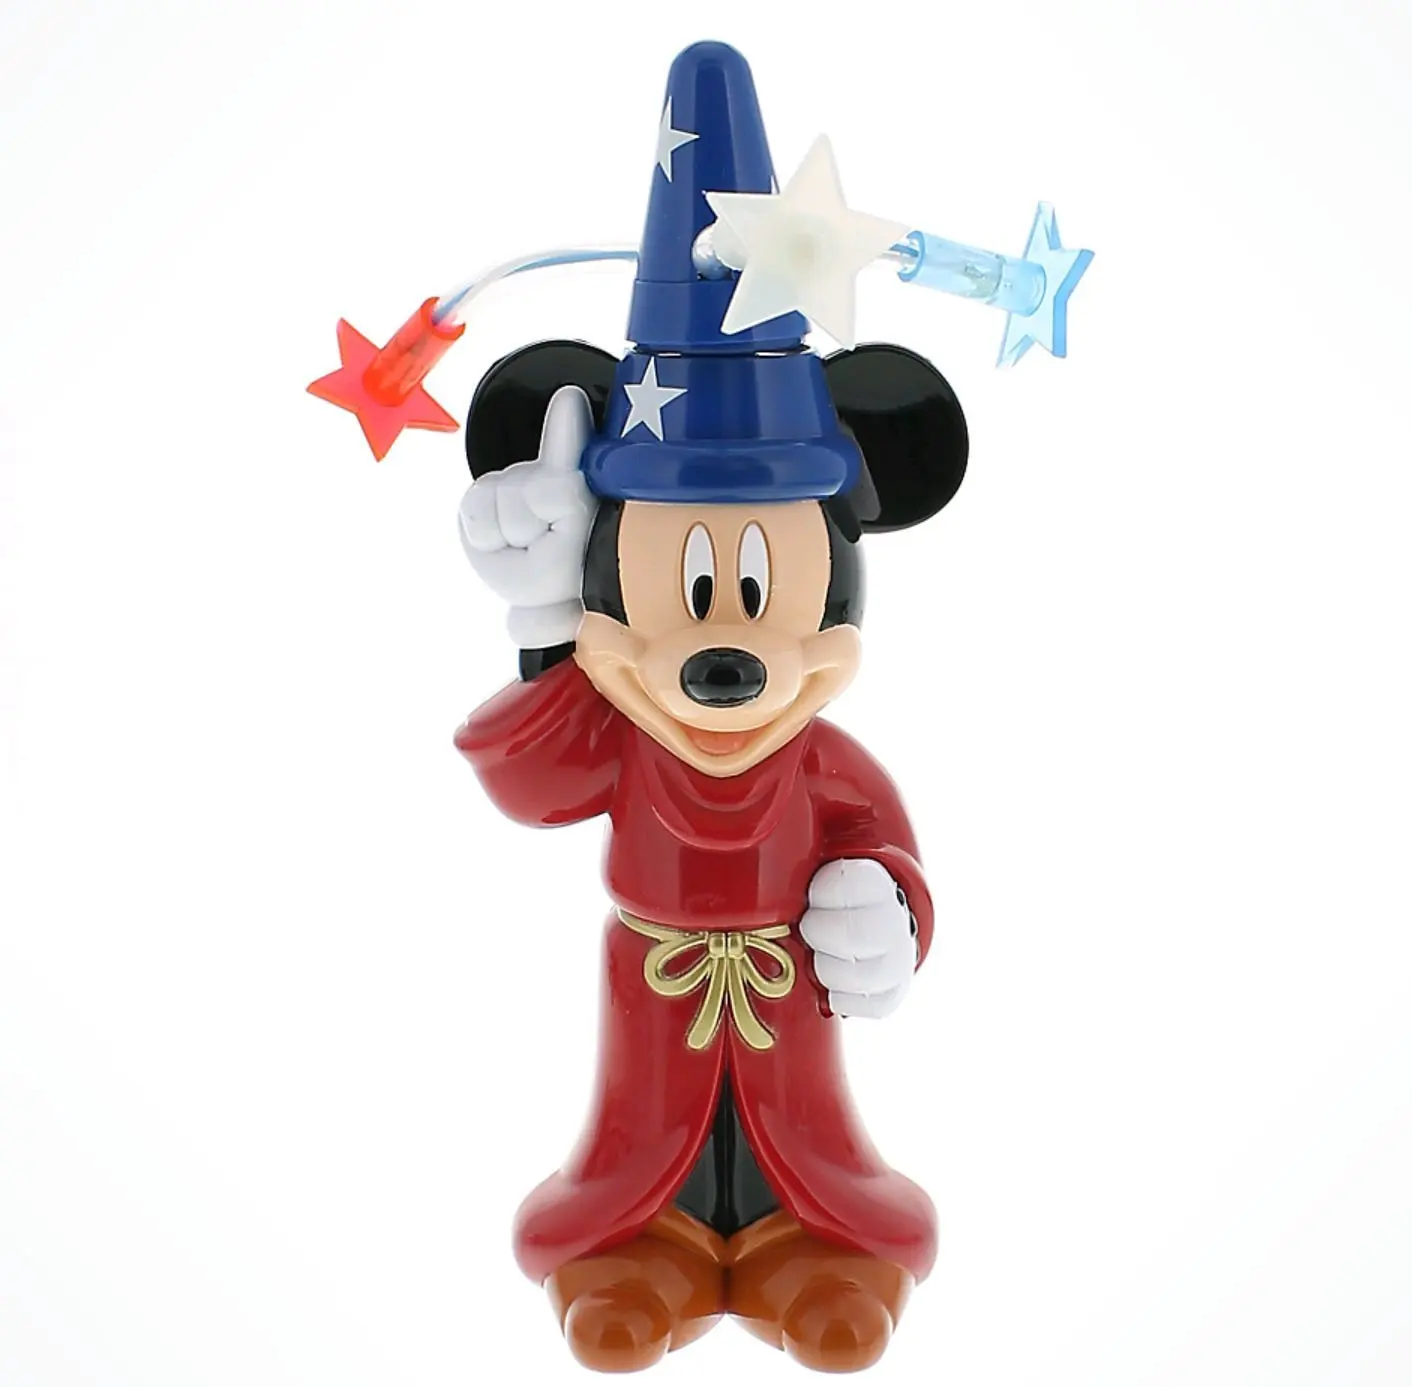 Disney Parks Exclusive Sorcerer Mickey Mouse Light-Up Spinner Chaser Toy. 